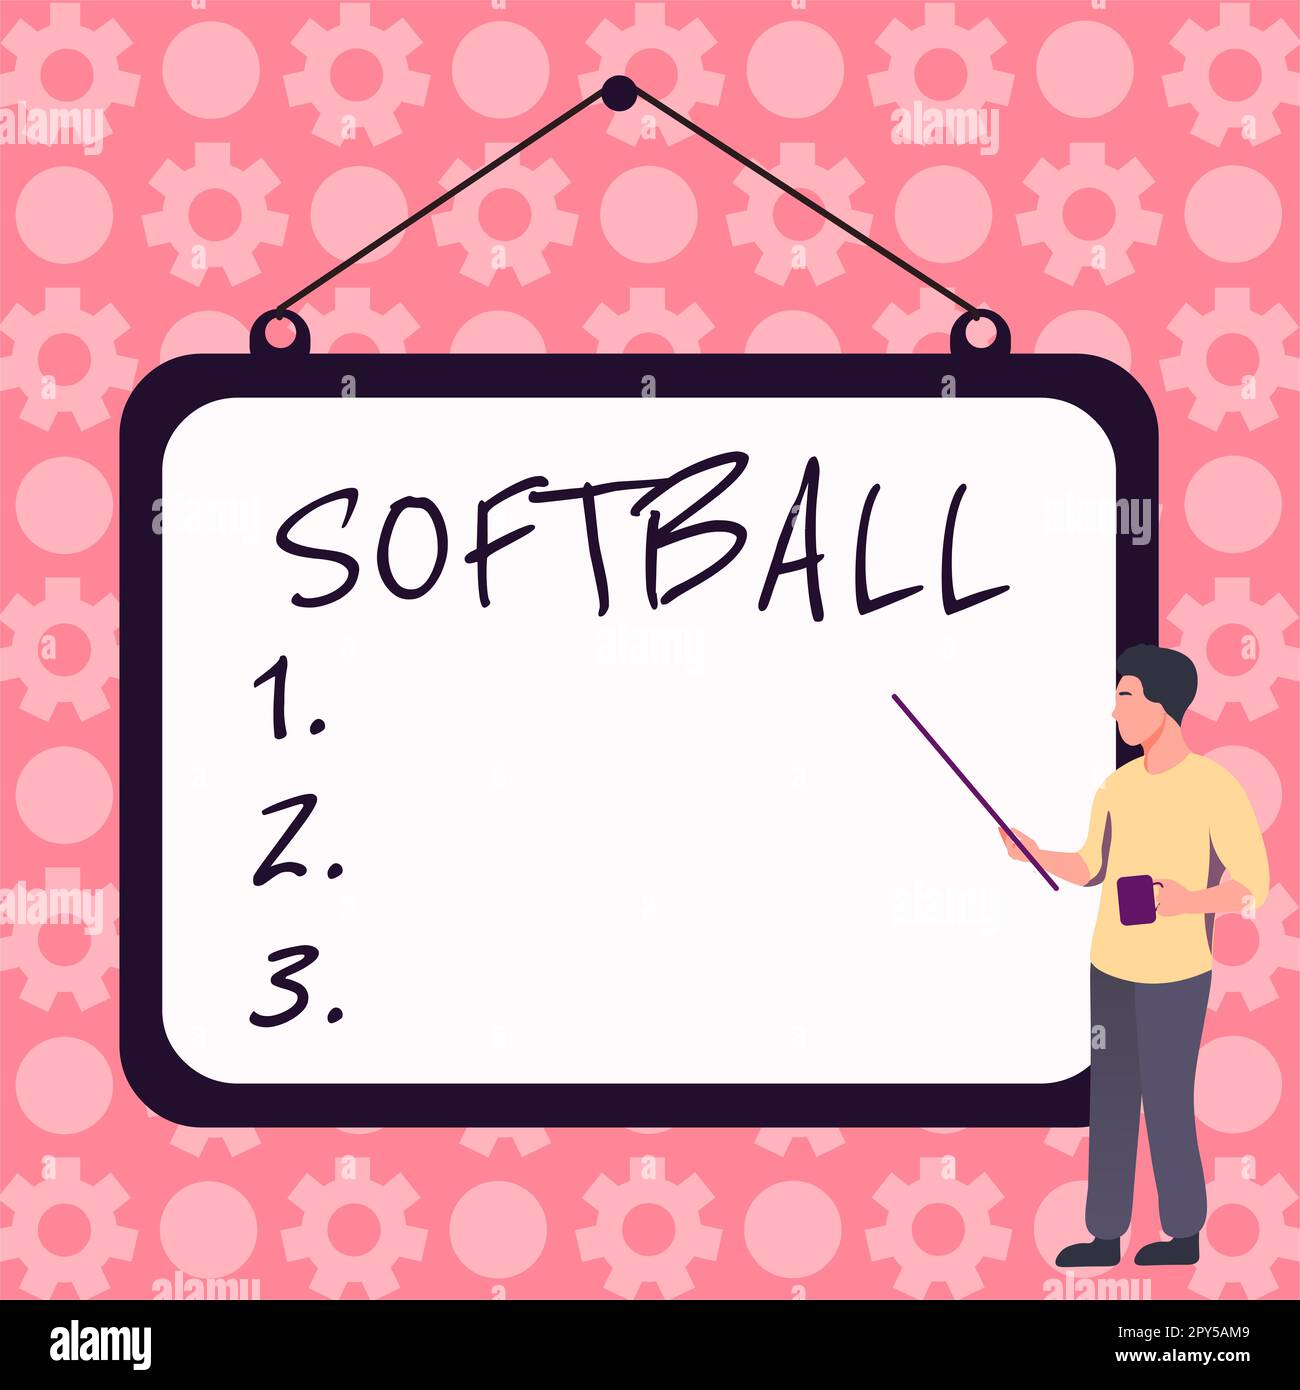 Sign displaying Softball. Word for a sport similar to baseball played with a ball and bat Stock Photo